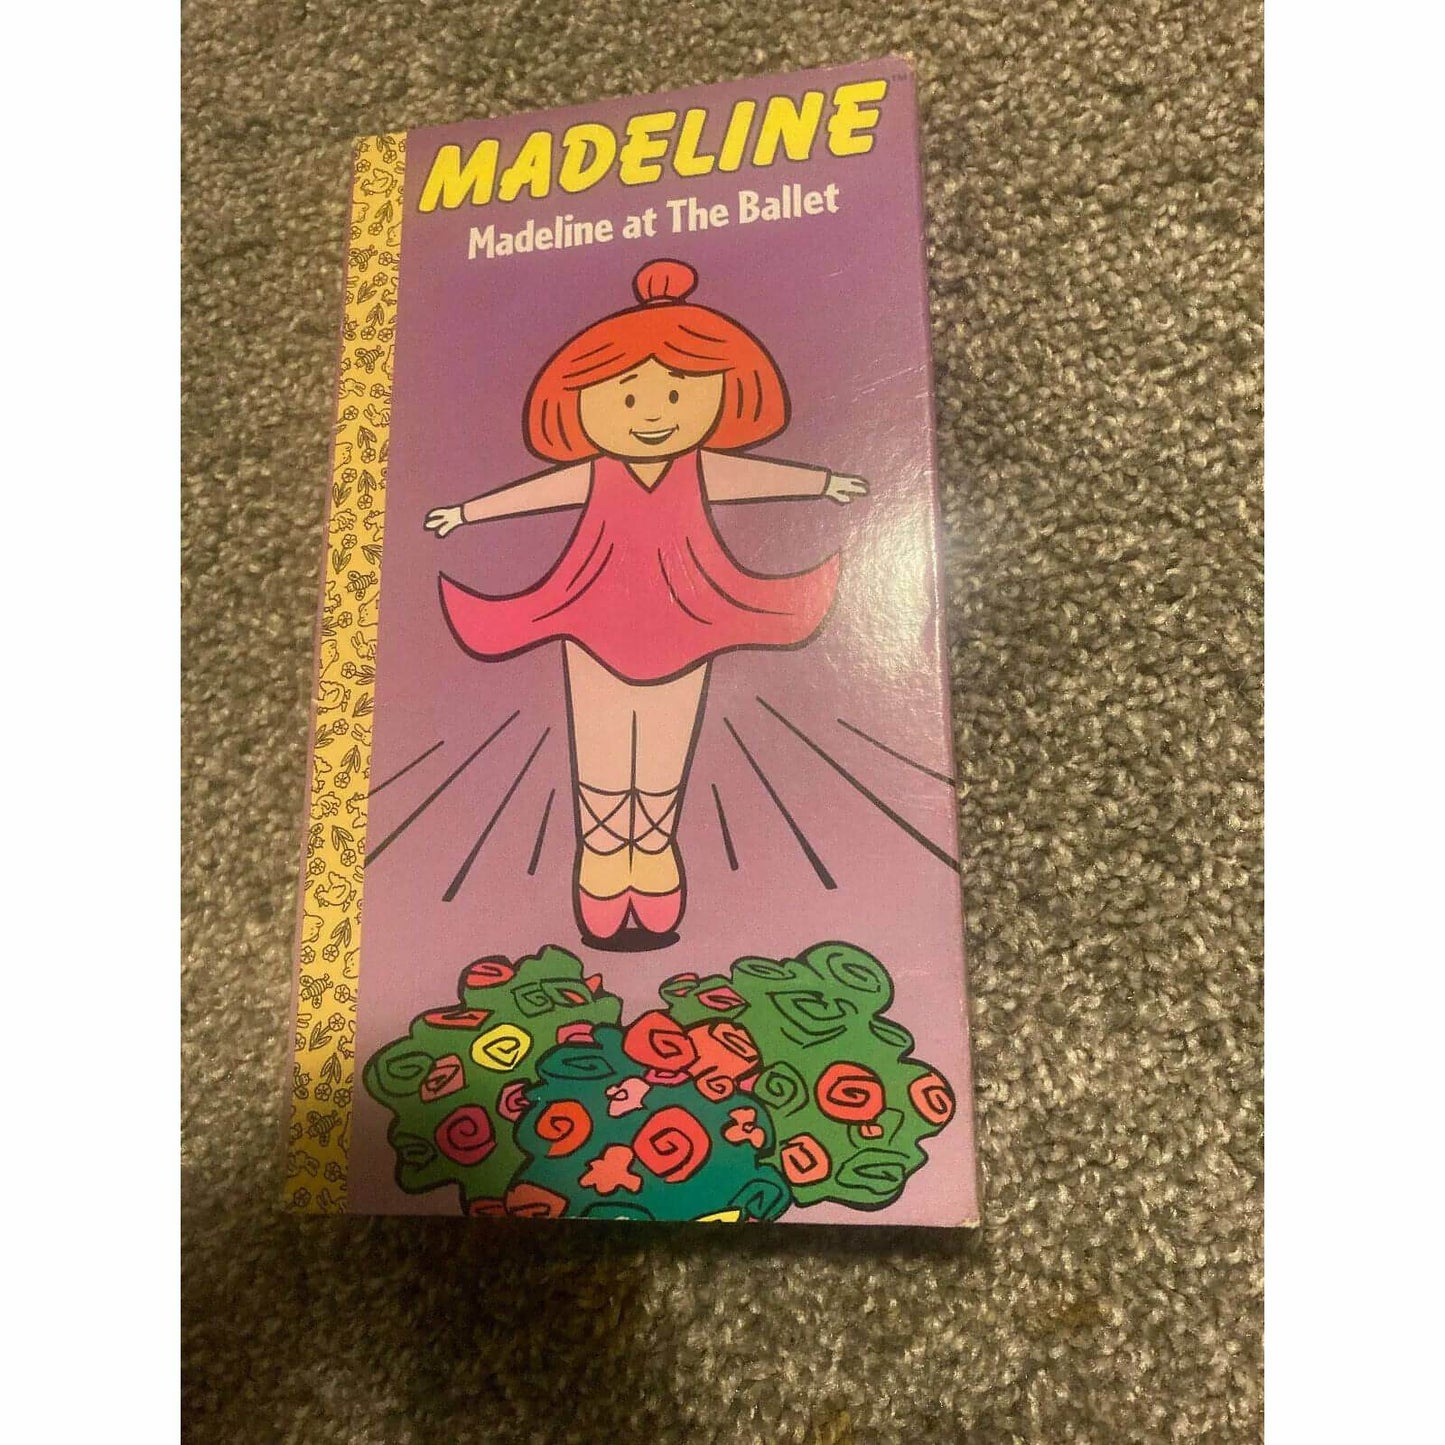 Madeline at the Ballet [VHS Sony Wonder] BooksCardsNBikes